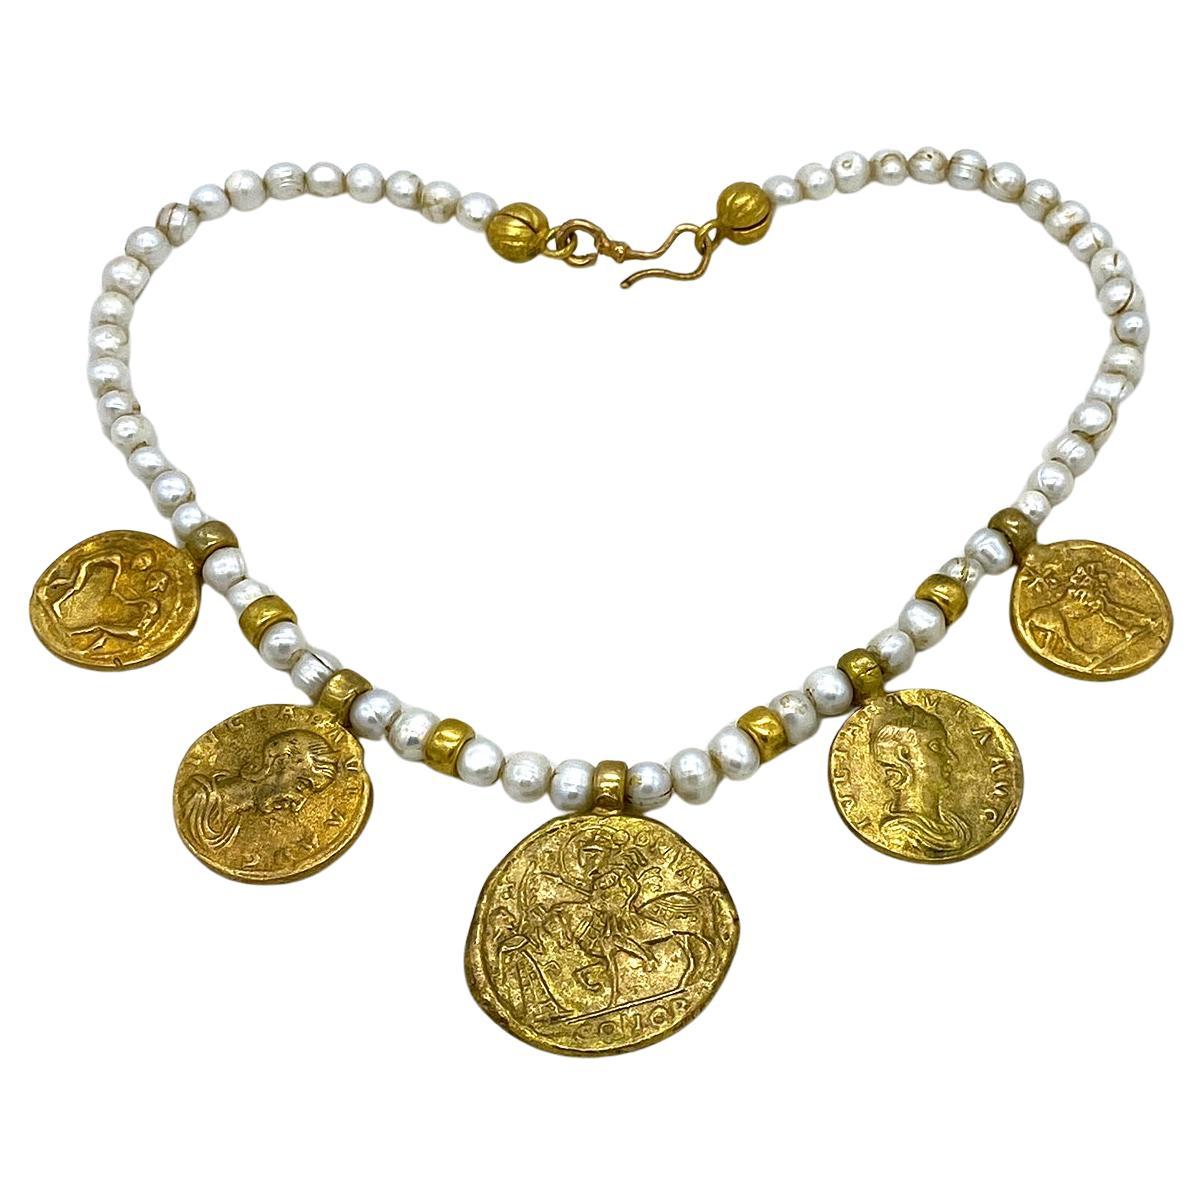 This is a freshwater pearl necklace with Roman coin charms. It is stranded with 8mm baroque pearls and gilt bronze components. There are five of three different denominations of gilt reproduction ancient coins as charms. 

Our vintage jewelry